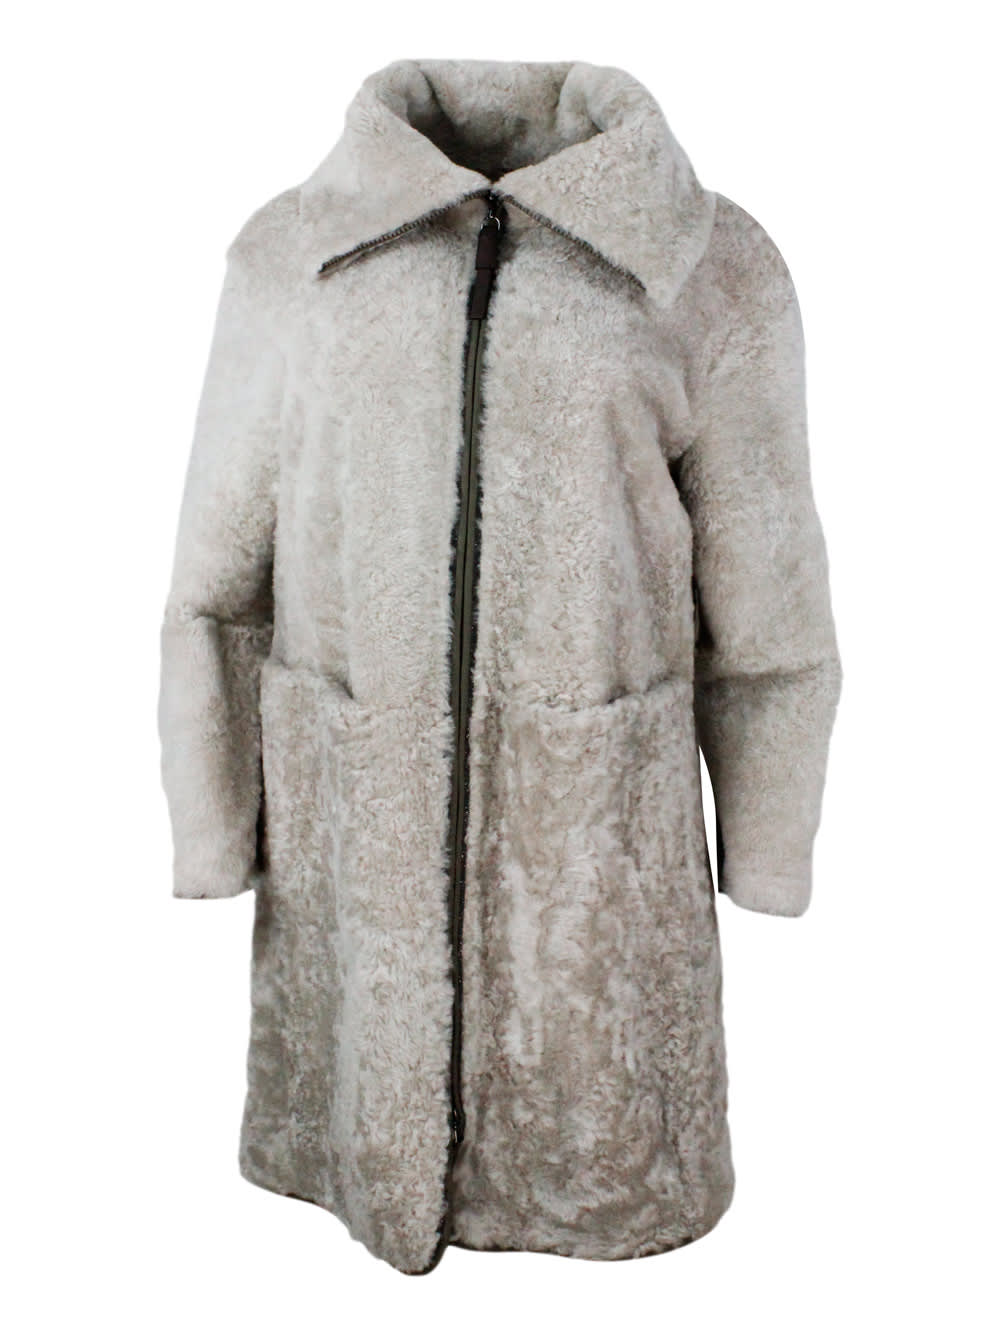 Long Coat In Precious And Refined Shearling Sheepskin With Zip Closure Embellished With Rows Of Brilliant Jewels And With Front Pockets